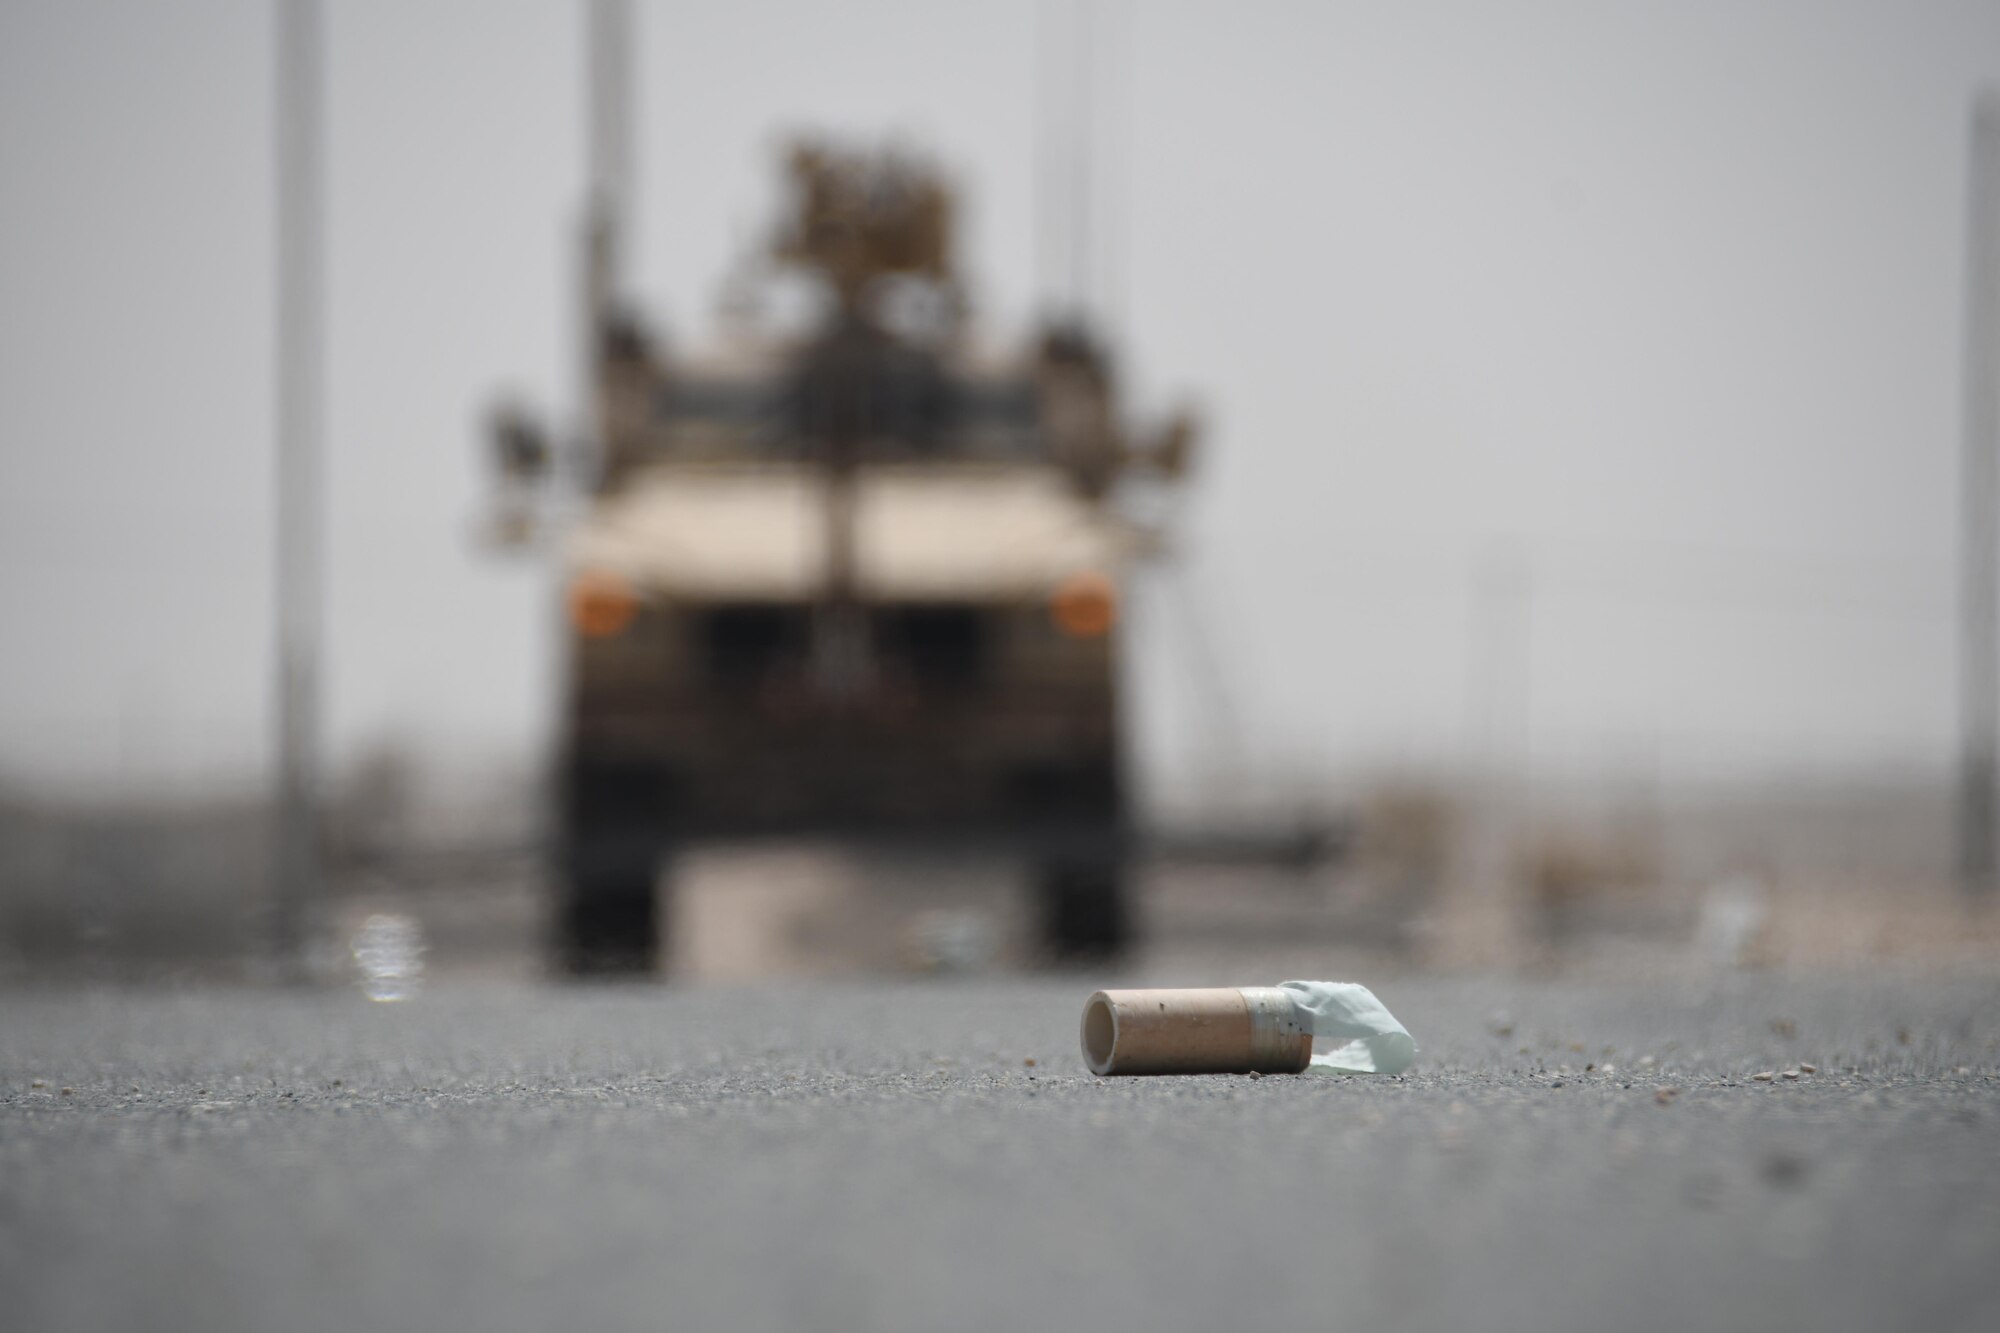 An improvised explosive device prop lies on a simulated airfield at Al Udeid Air Base, Qatar, March  21, 2017. The 379th Expeditionary Civil Engineer Squadron Explosive Ordnance Disposal Flight conducted an exercise that involved sweeping IED’s off of a simulated runway with a mine resistant ambush protected all-terrain vehicle, and then disposing of them safely. (U.S. Air Force photo by Senior Airman Miles Wilson)